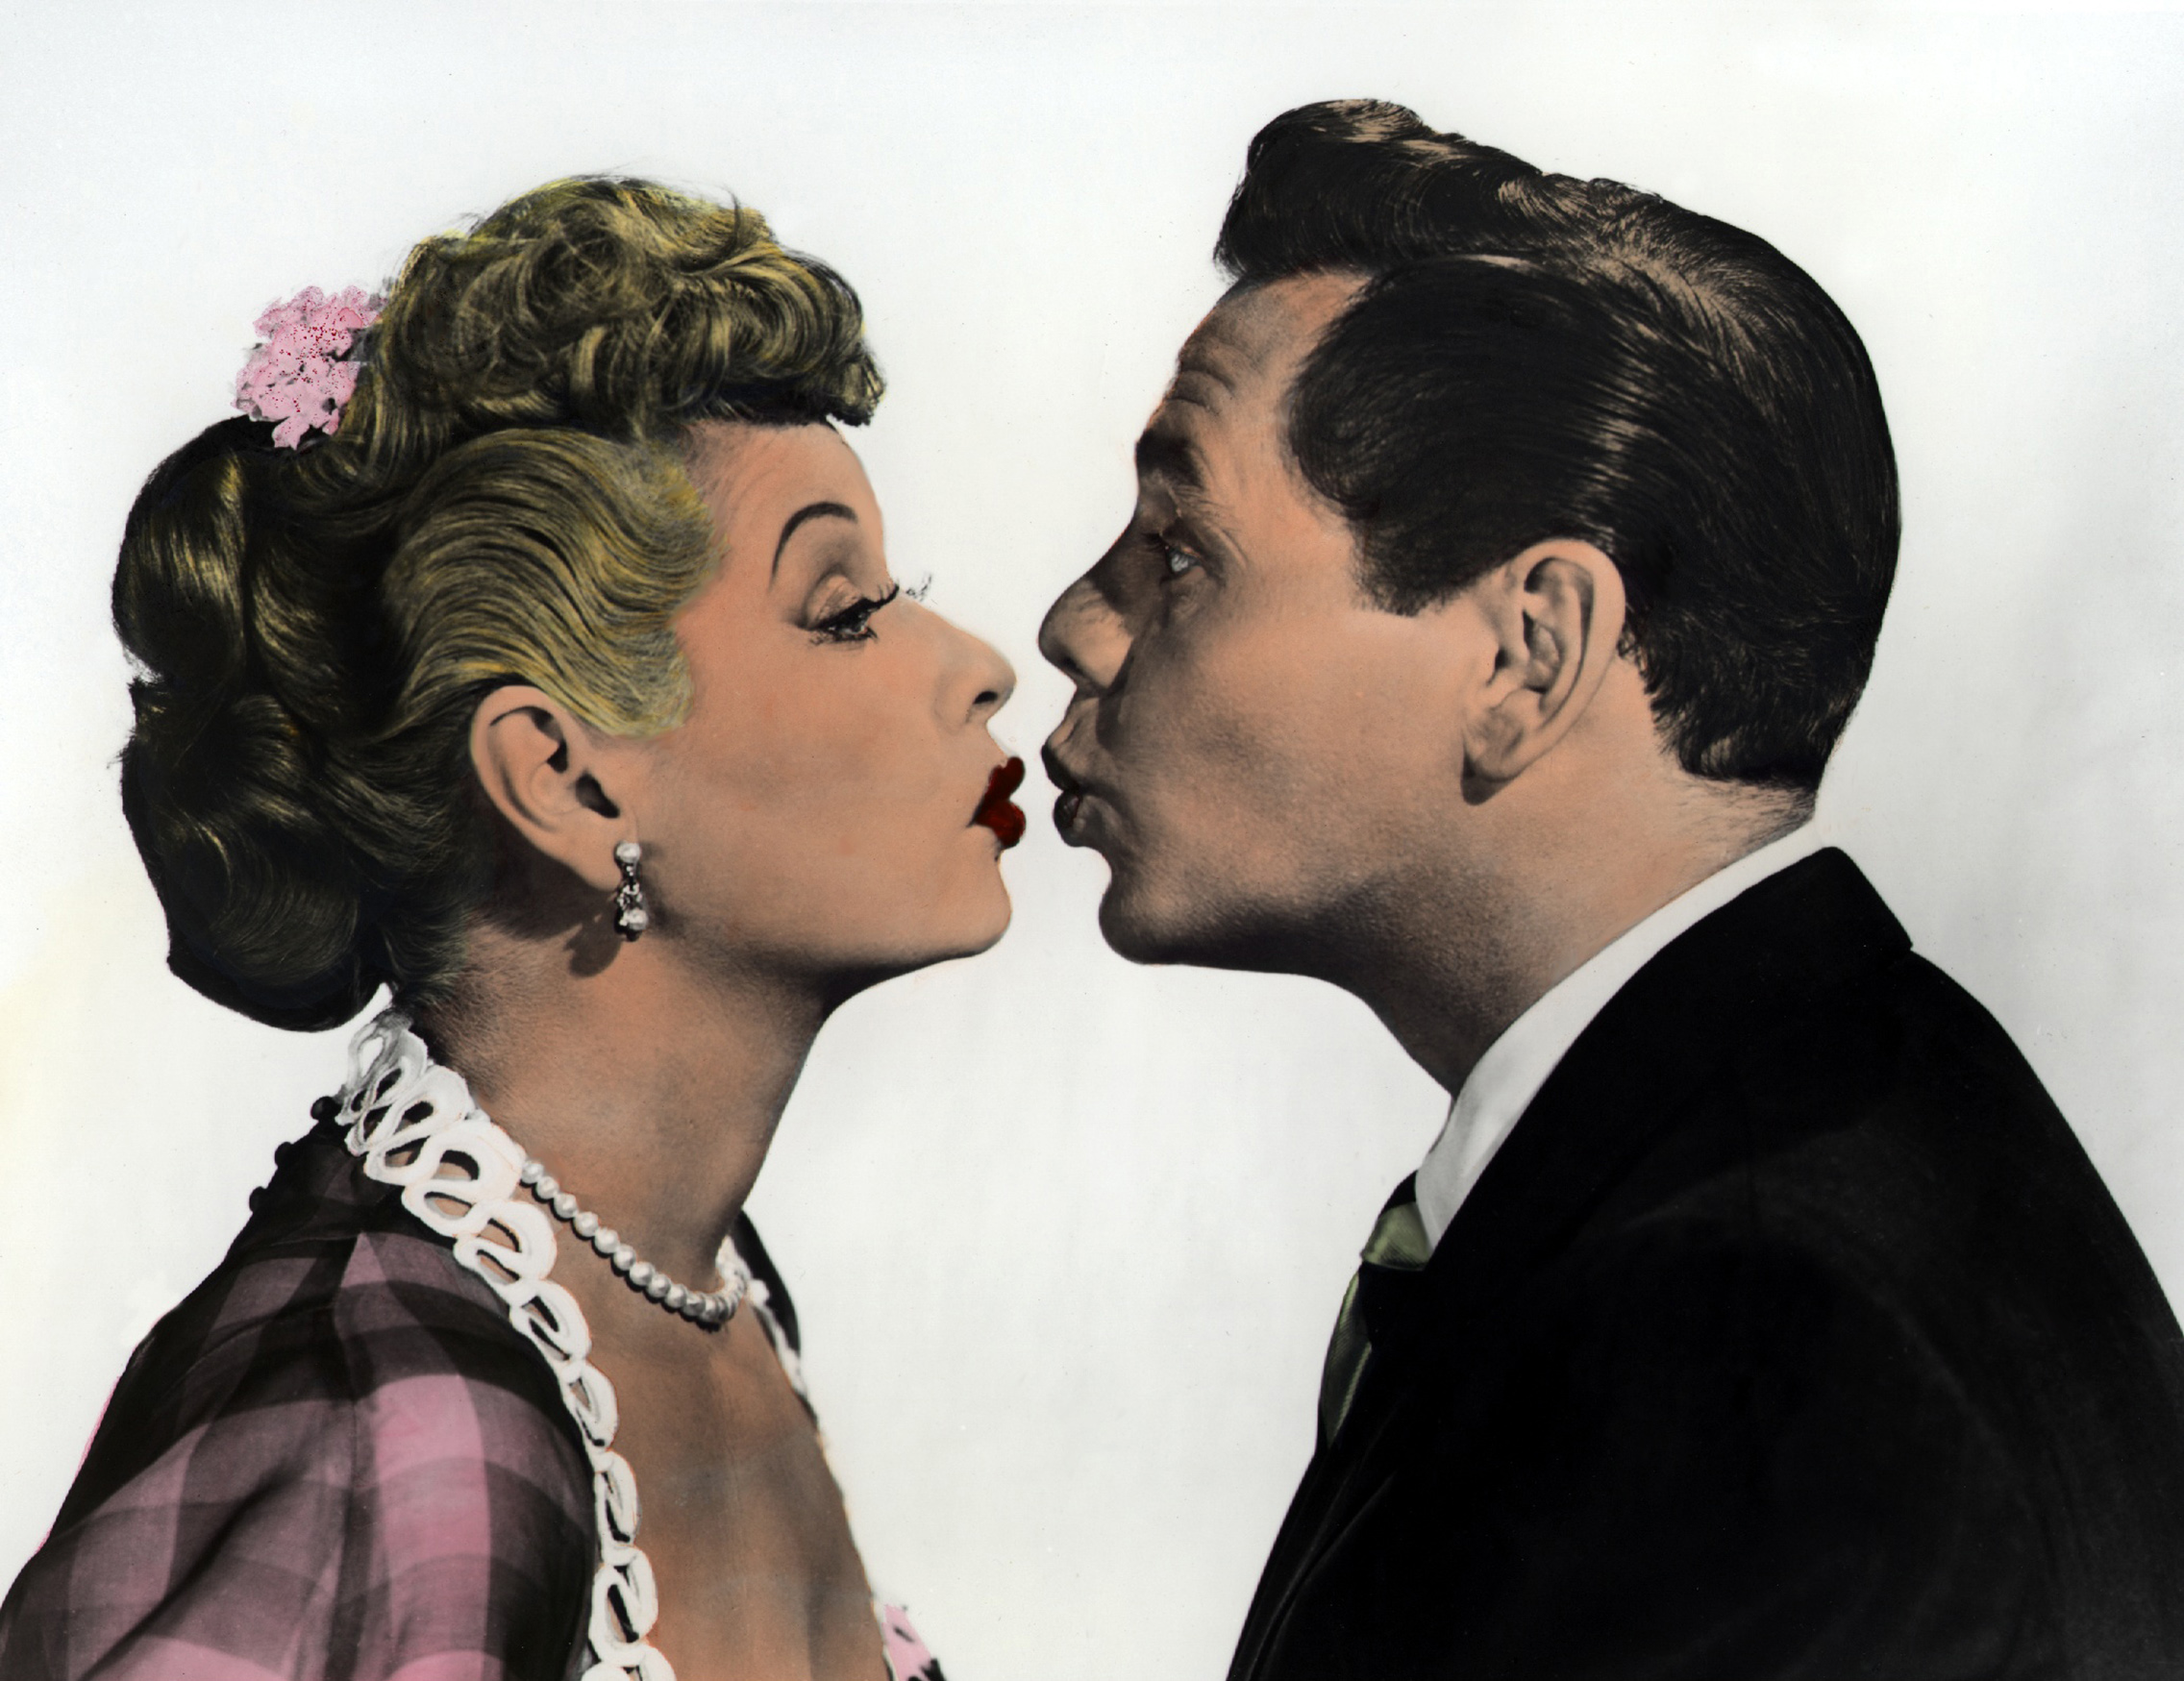 'I Love Lucy' stars Lucille Ball and Desi Arnaz kissing in a promotional image for 'The Long, Long Trailer'